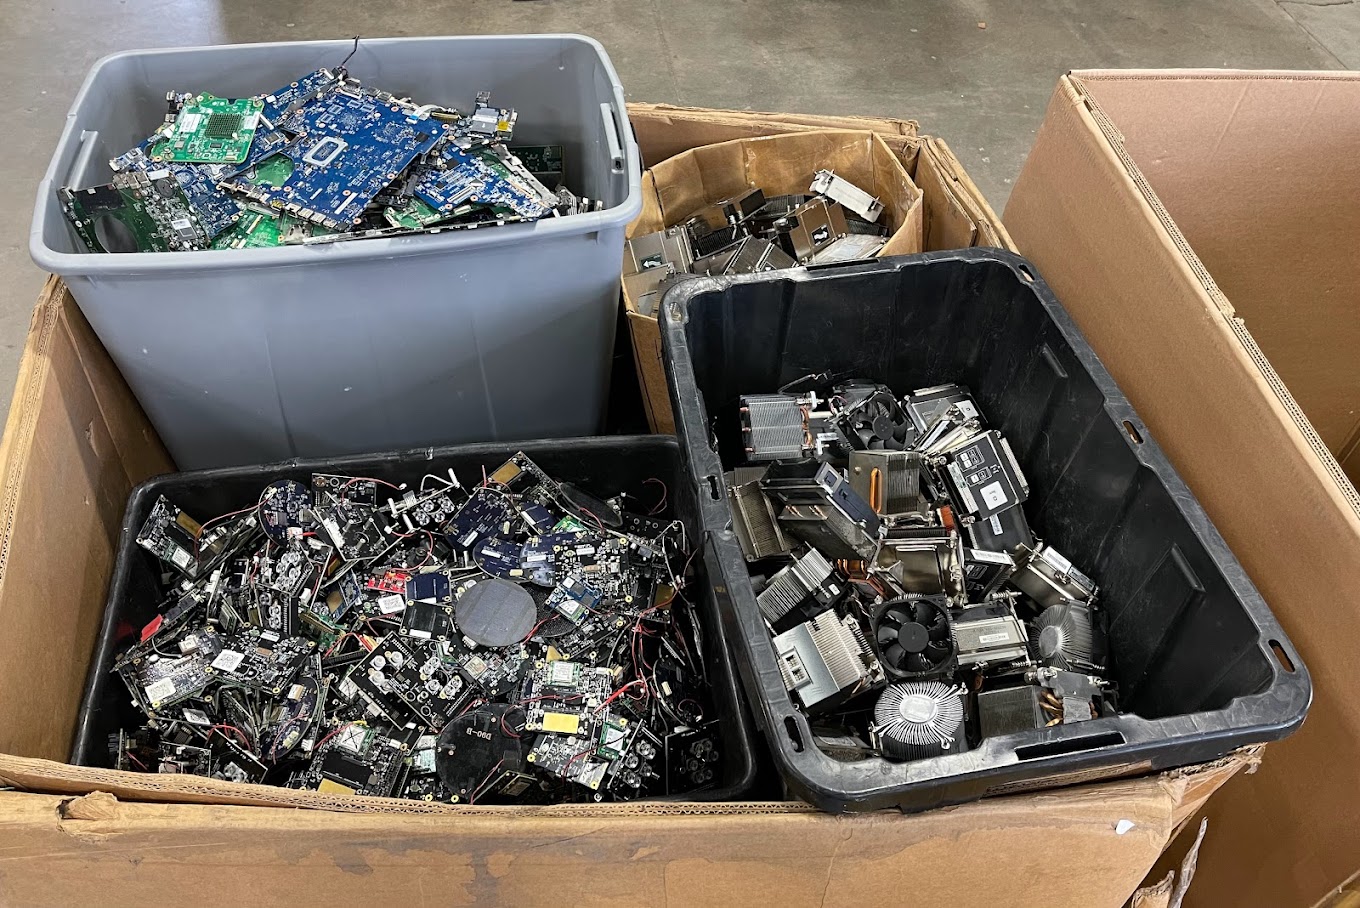 Powder Springs's eco-friendly approach to electronic recycling, offering services in the disposal of electronics and IT equipment, with a focus on sustainable practices.